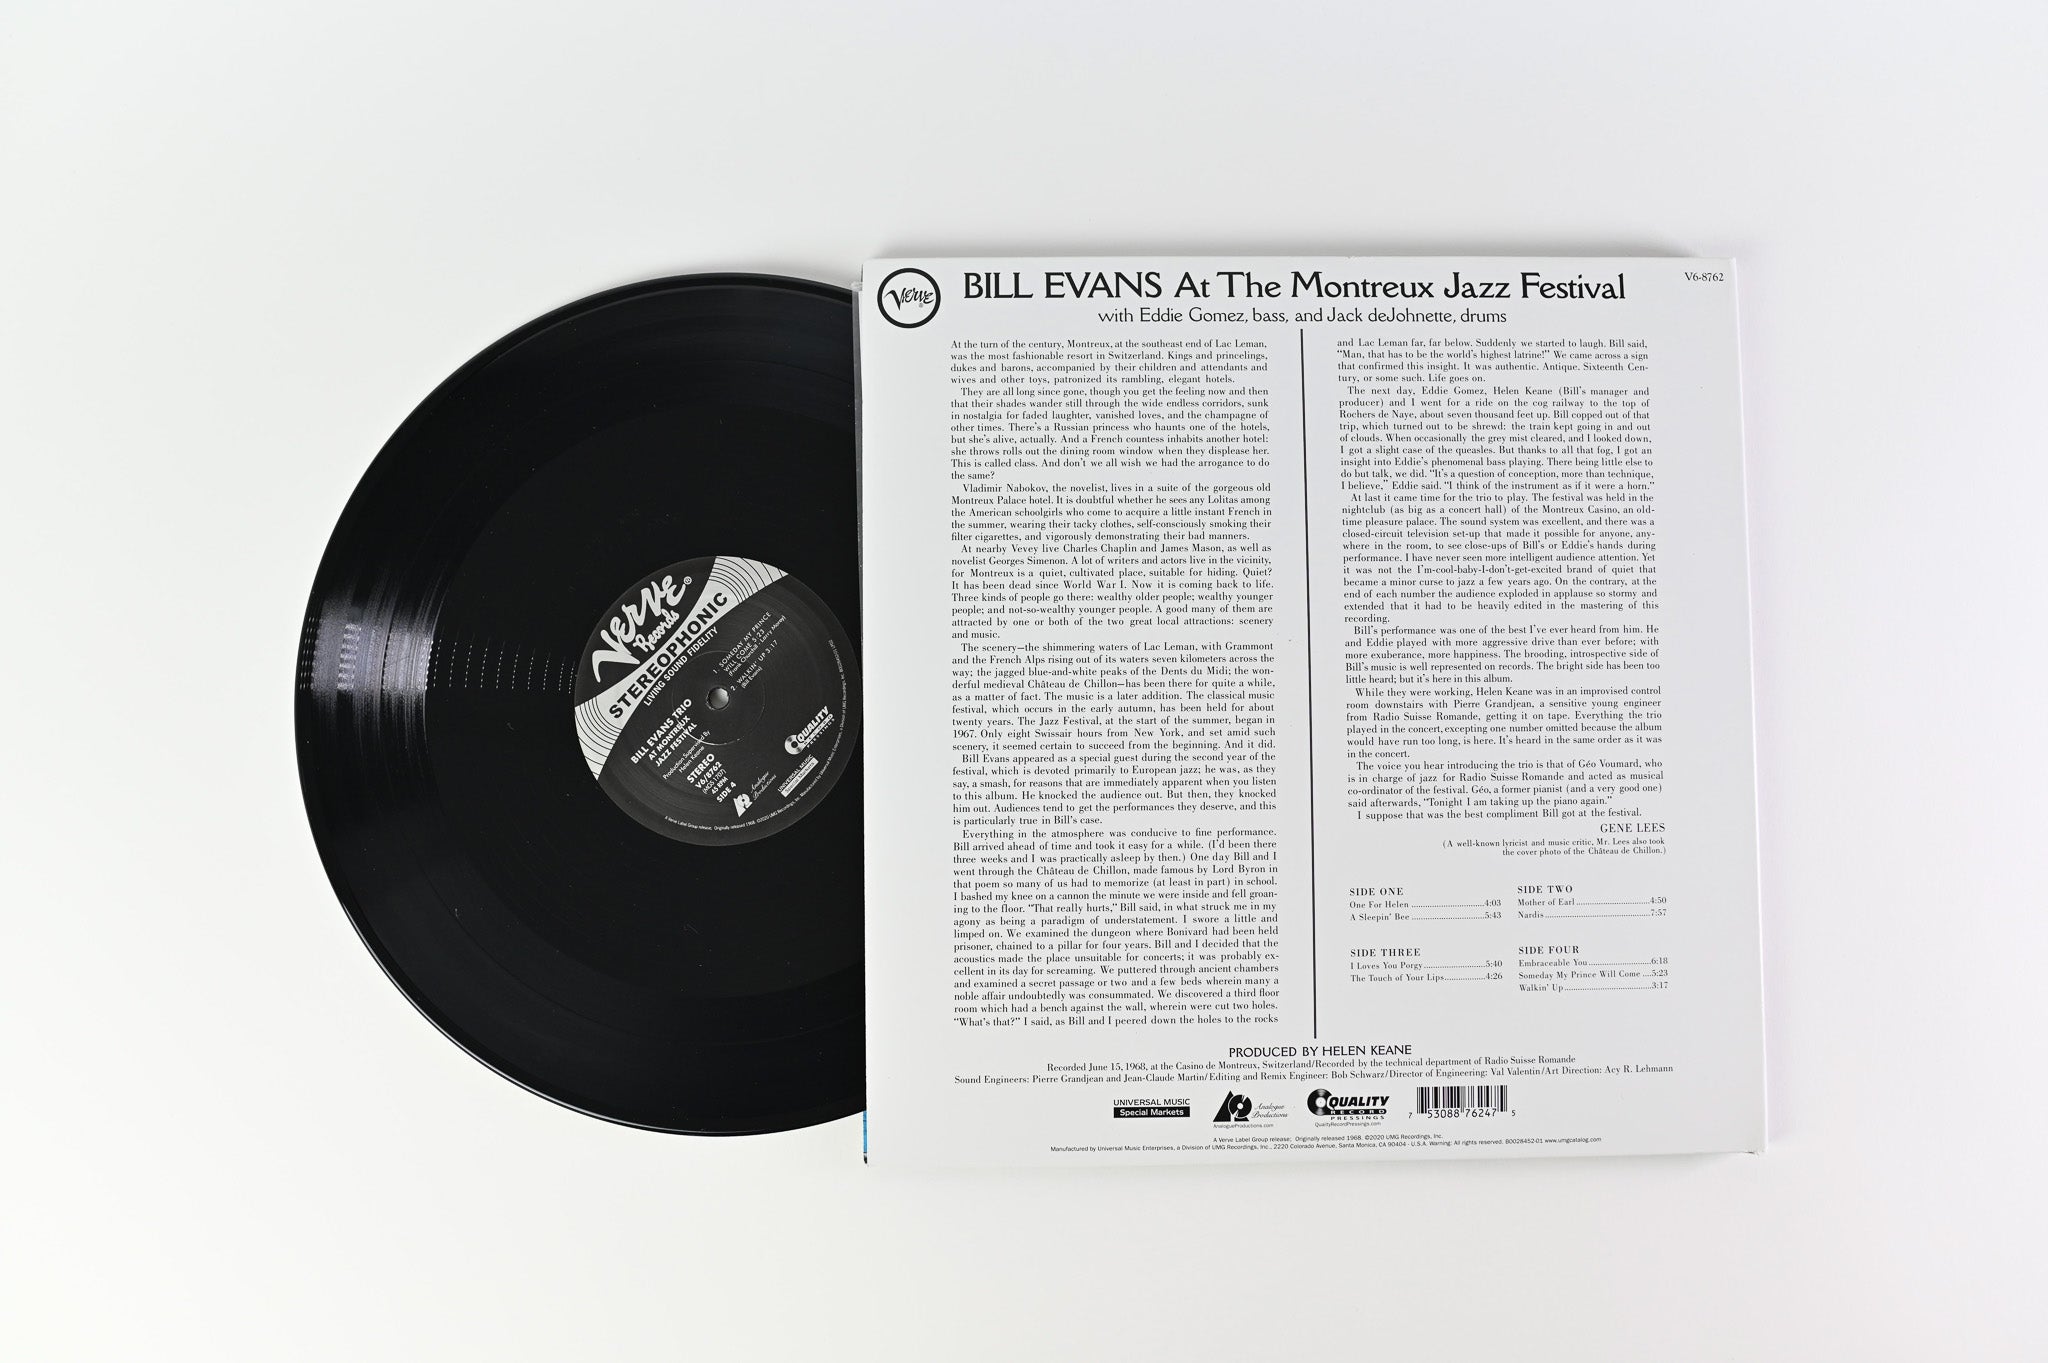 Bill Evans - At The Montreux Jazz Festival on Verve Analogue Productions 200 Gram Reissue